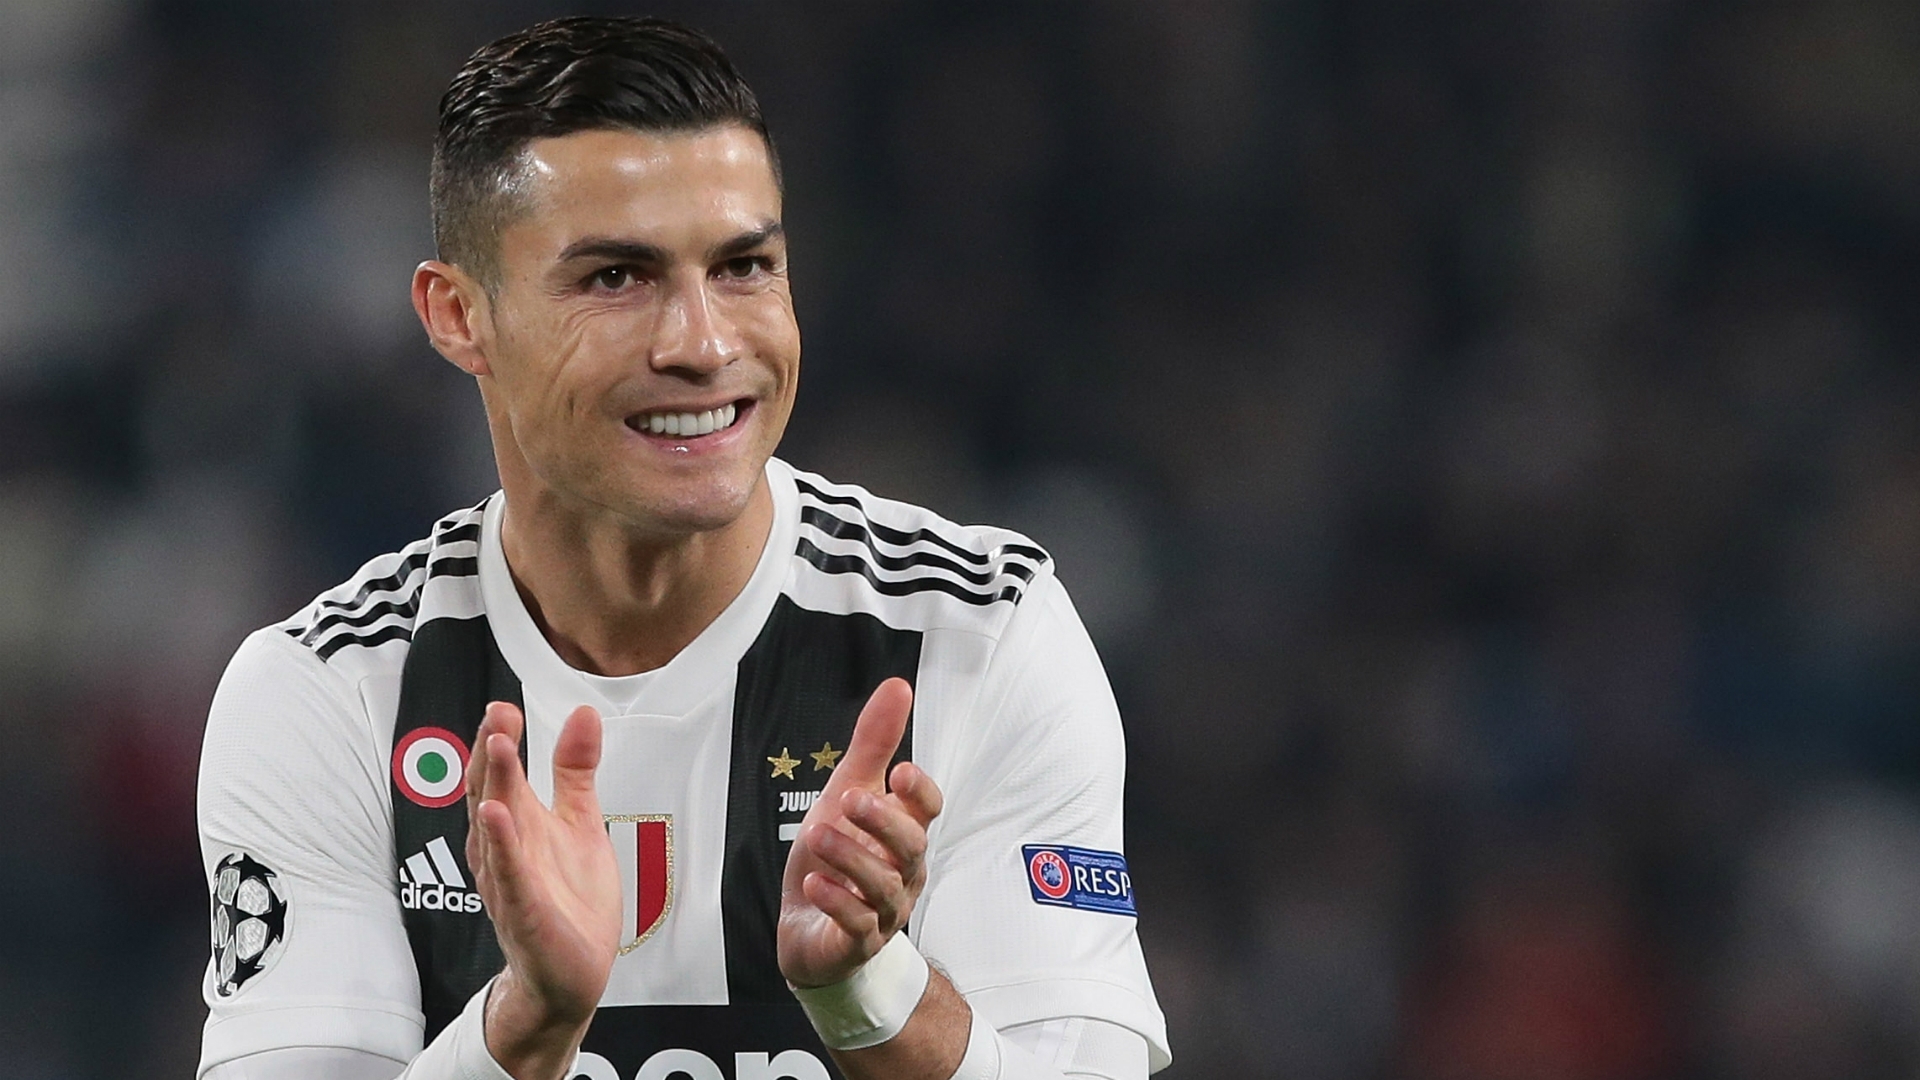 Cristiano Ronaldo excited about UCL knockout stage